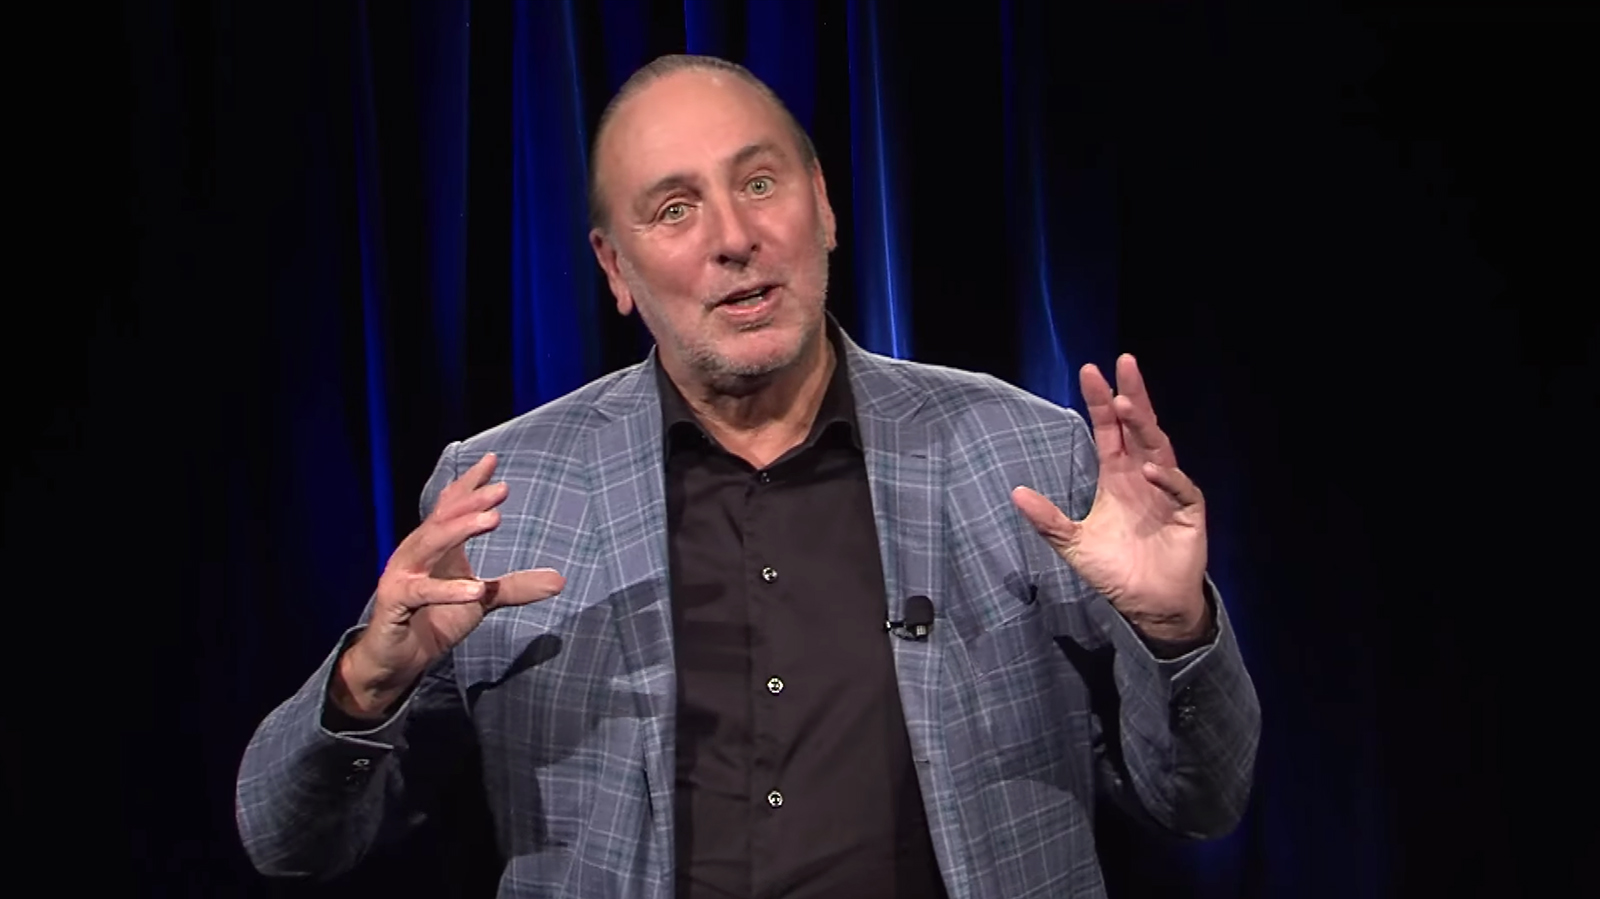 Brian Houston addresses his resignation from Hillsong Church in a video released Thurdsay, Nov. 3, 2022. Video screen grab